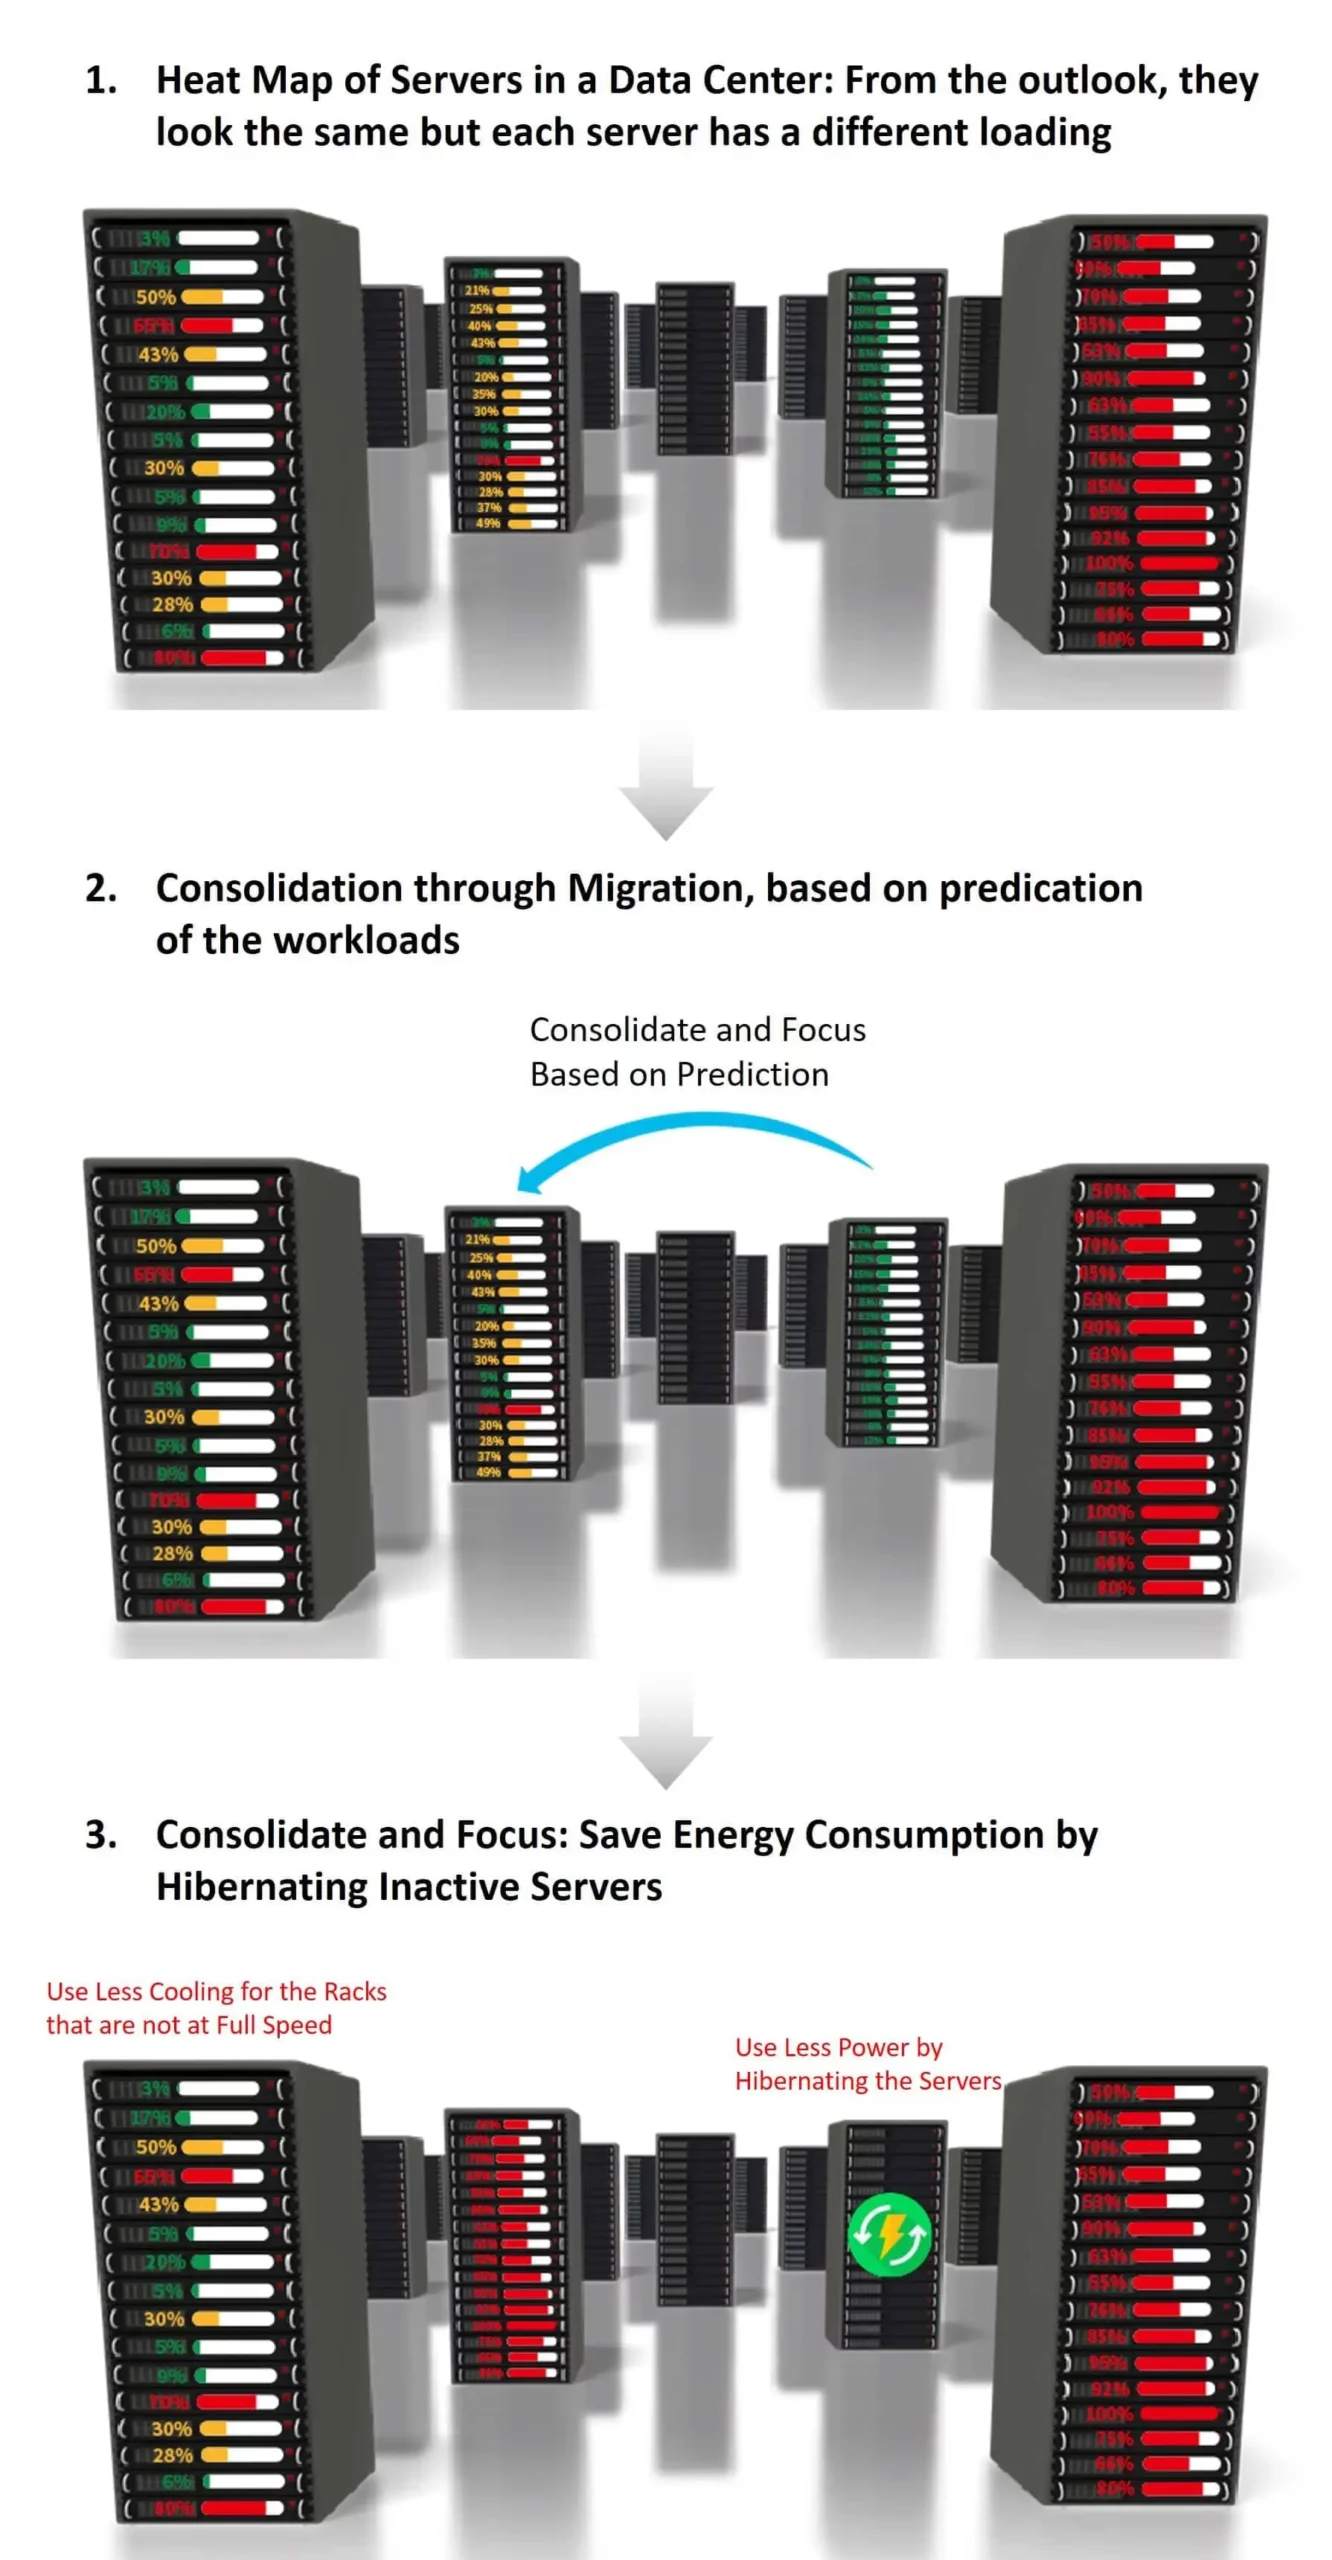 Figure 5 ProphetStor Way: Collect, Analyze, Adapt, Consolidate, Focus. Use Software Sensors for the Workload Data Collection. Recommendation and Execution for Power and Cooling Consumption_Step 1-3